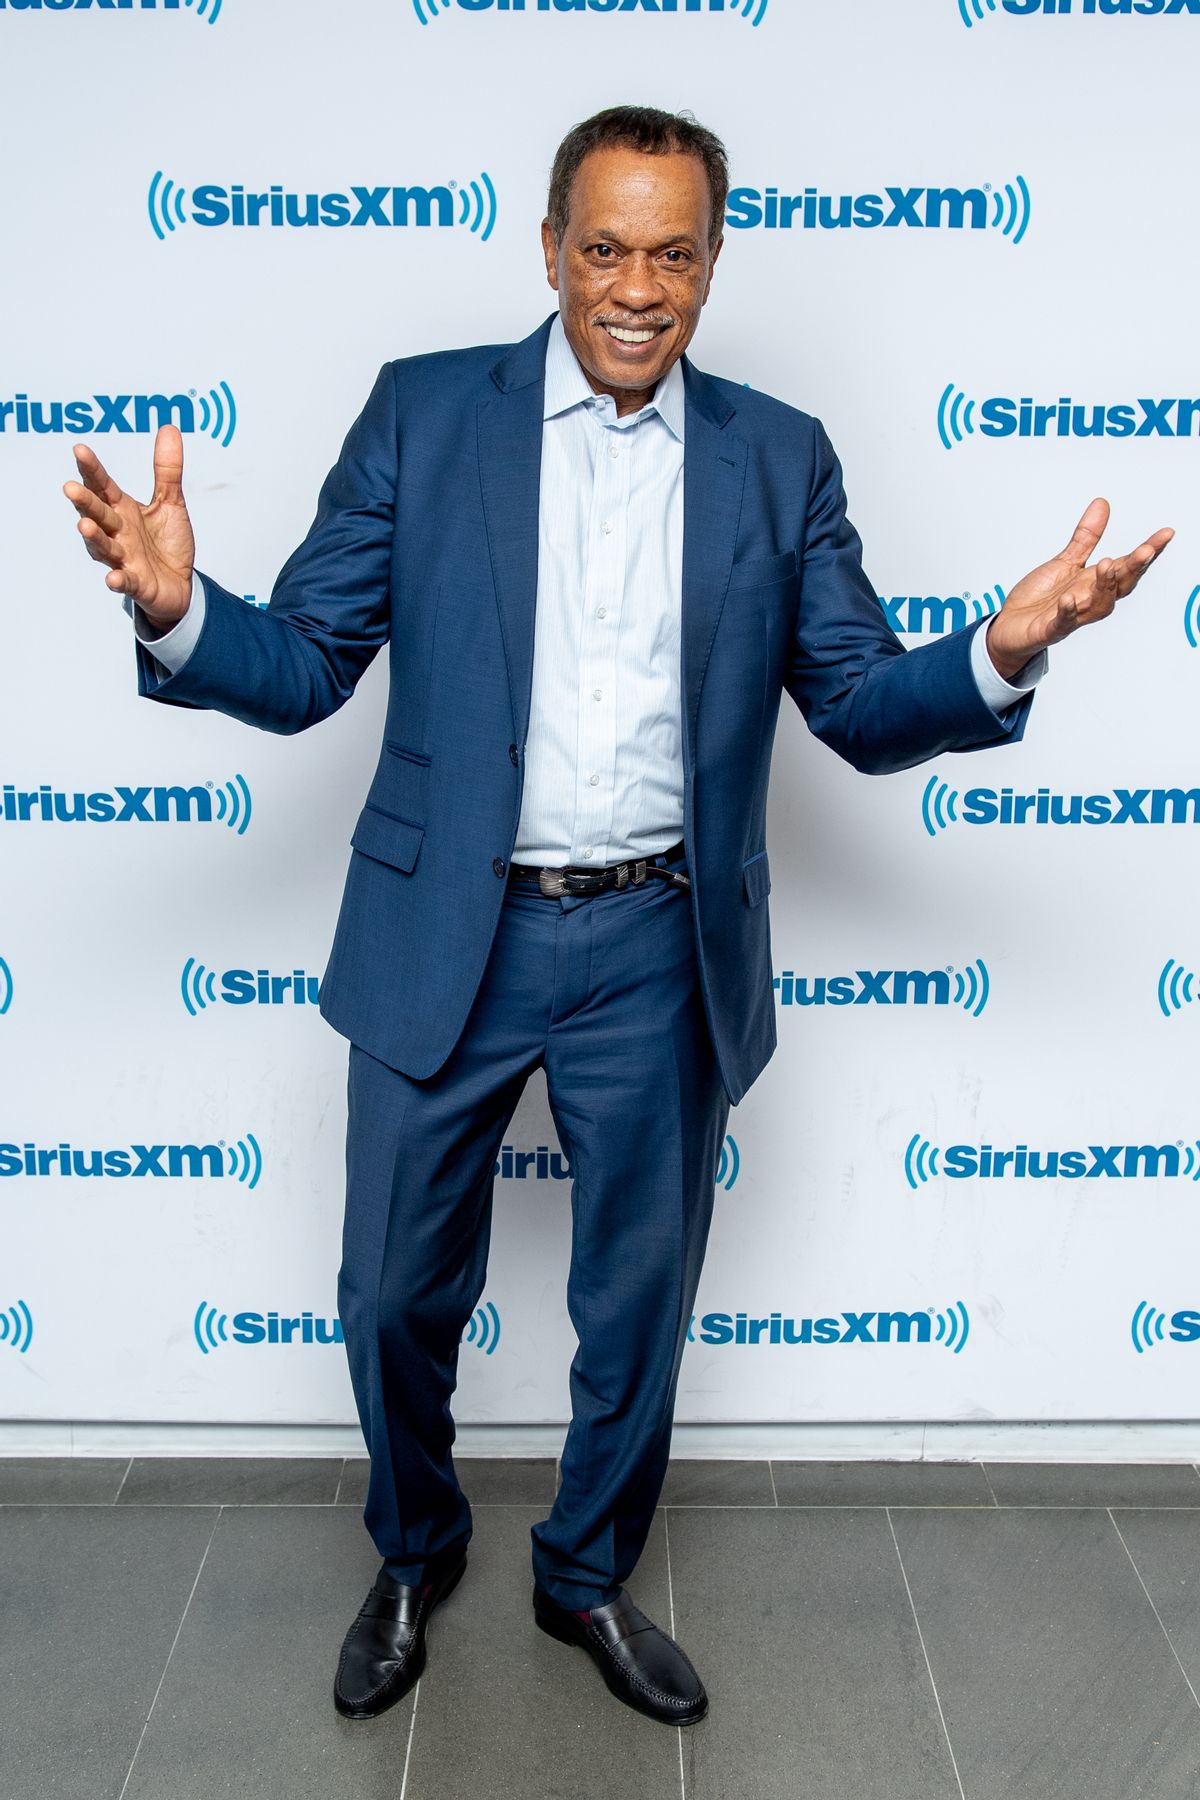 NEW YORK, NEW YORK - JANUARY 08:   Fox News political analyst Juan Williams visits SiriusXM Studios on January 08, 2019 in New York City. (Photo by Roy Rochlin/Getty Images)